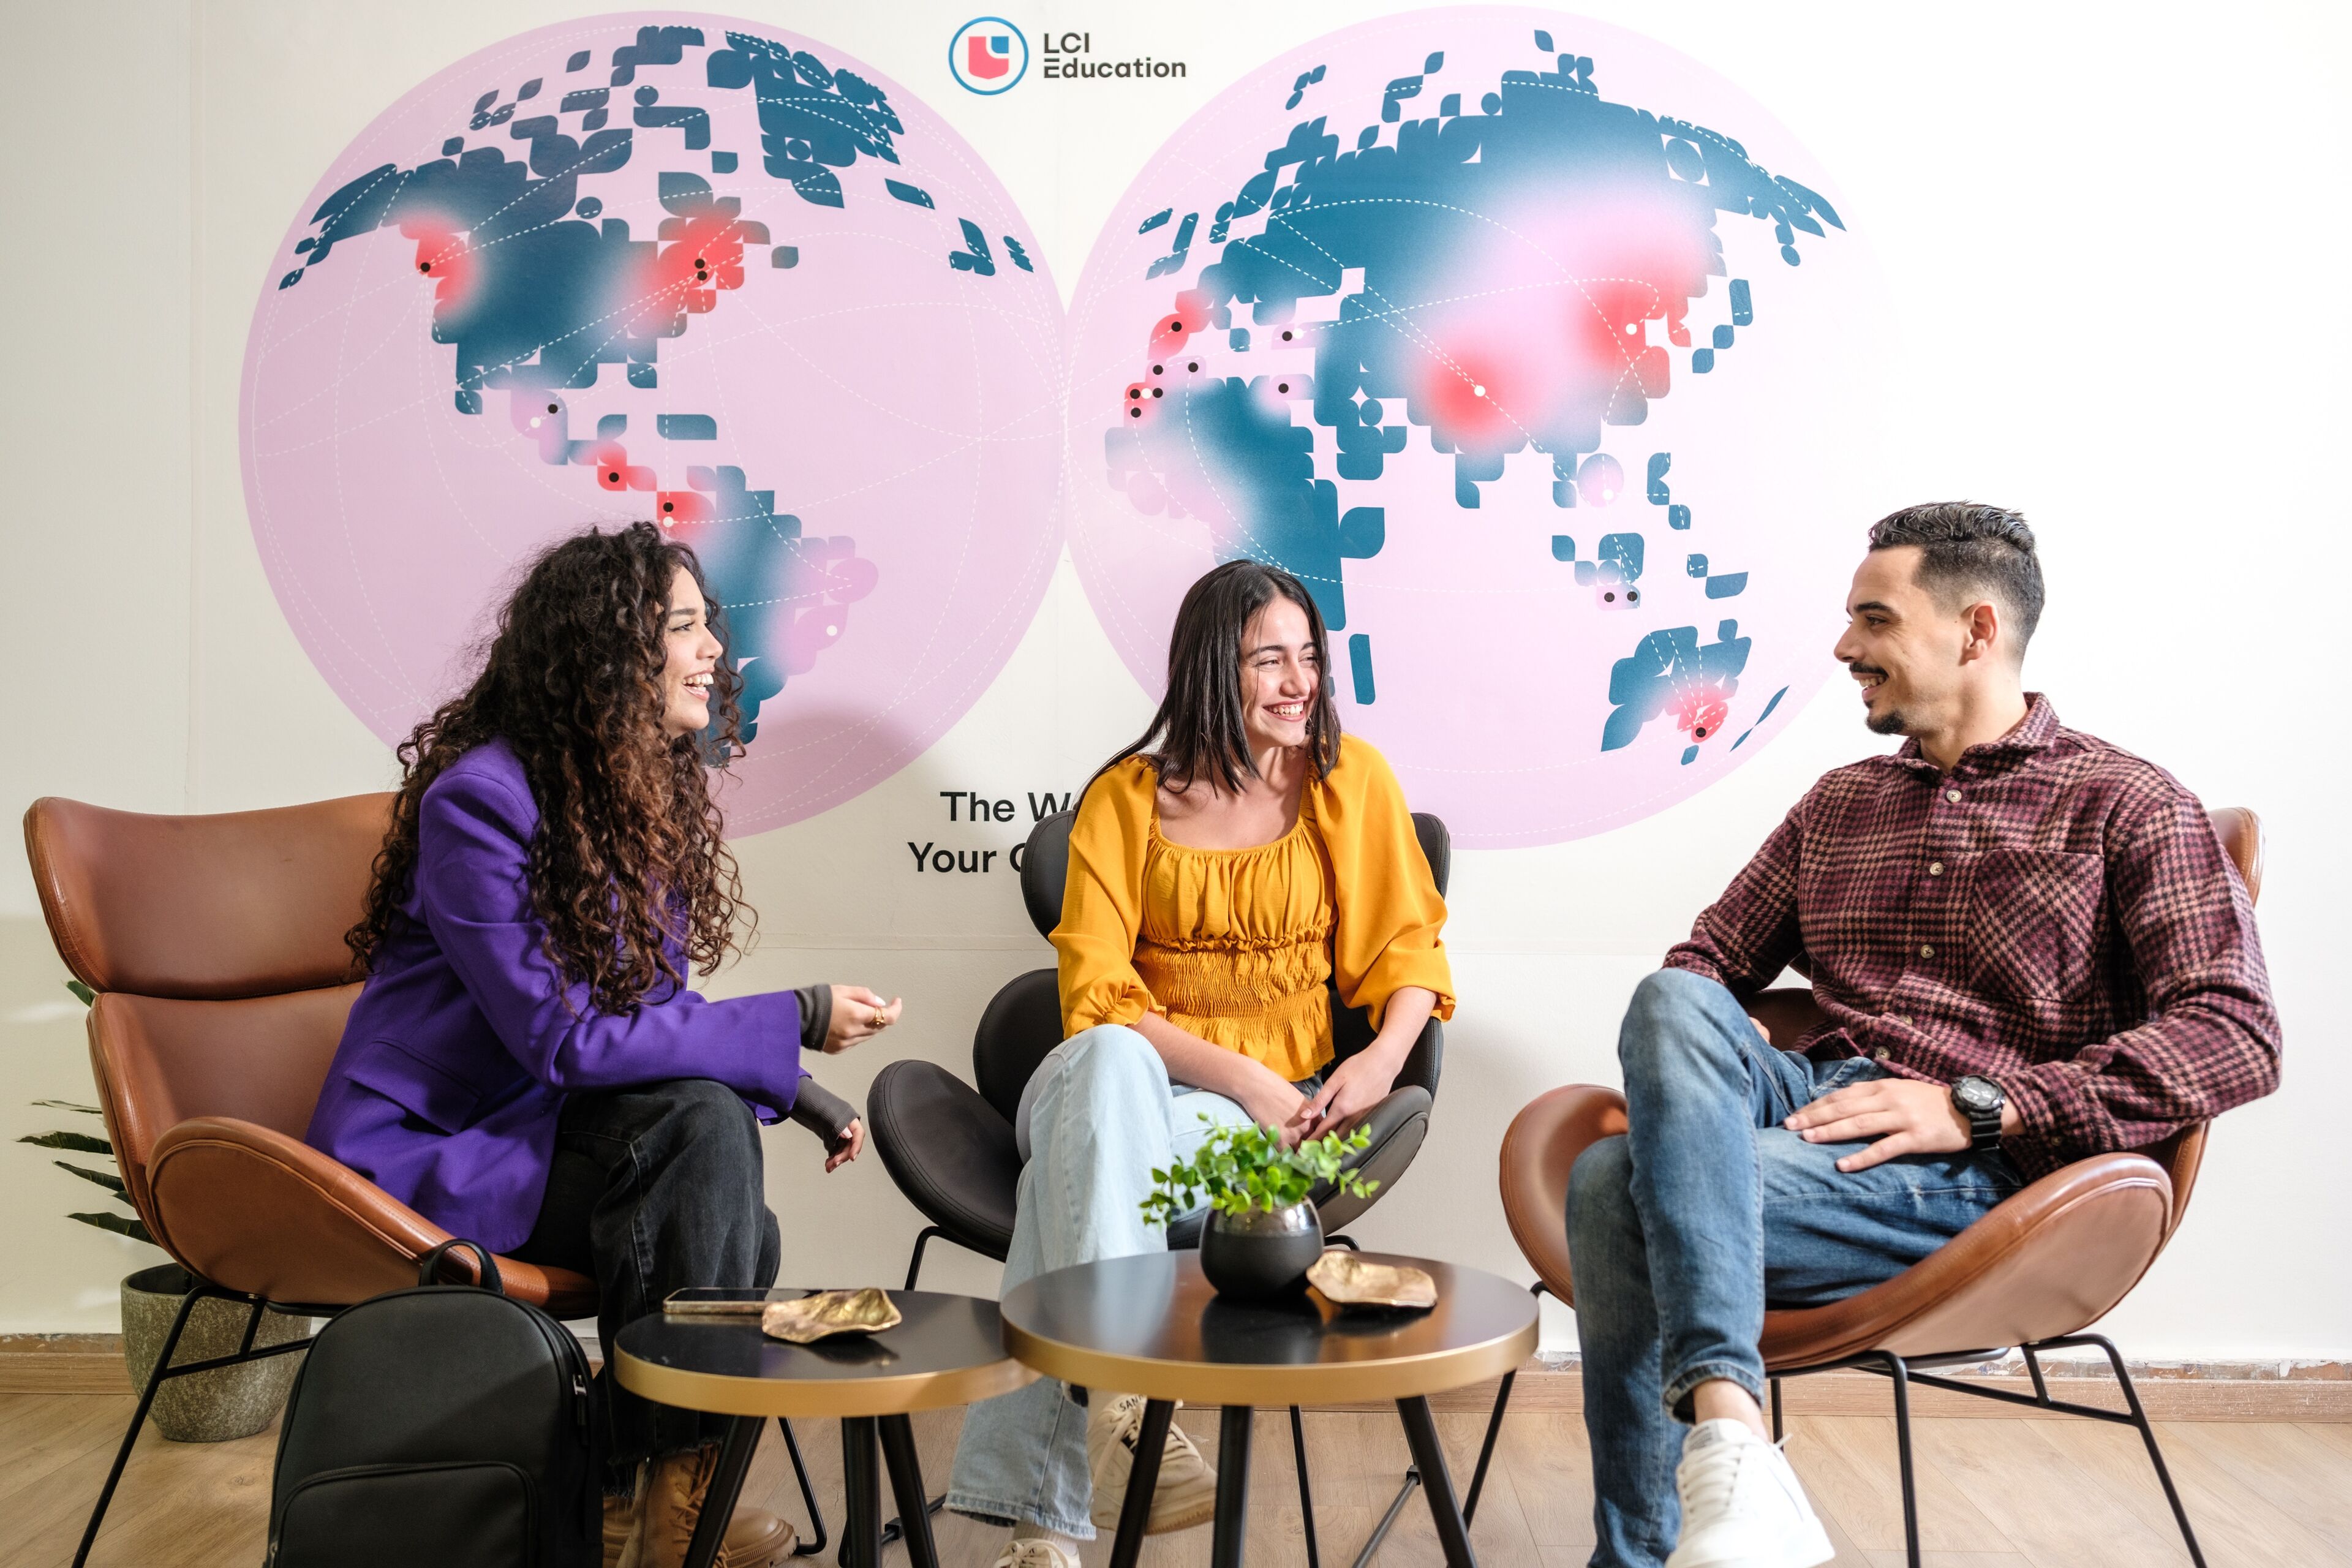 Three people casually conversing in a vibrant setting with world map graphics in the background, symbolizing international education.